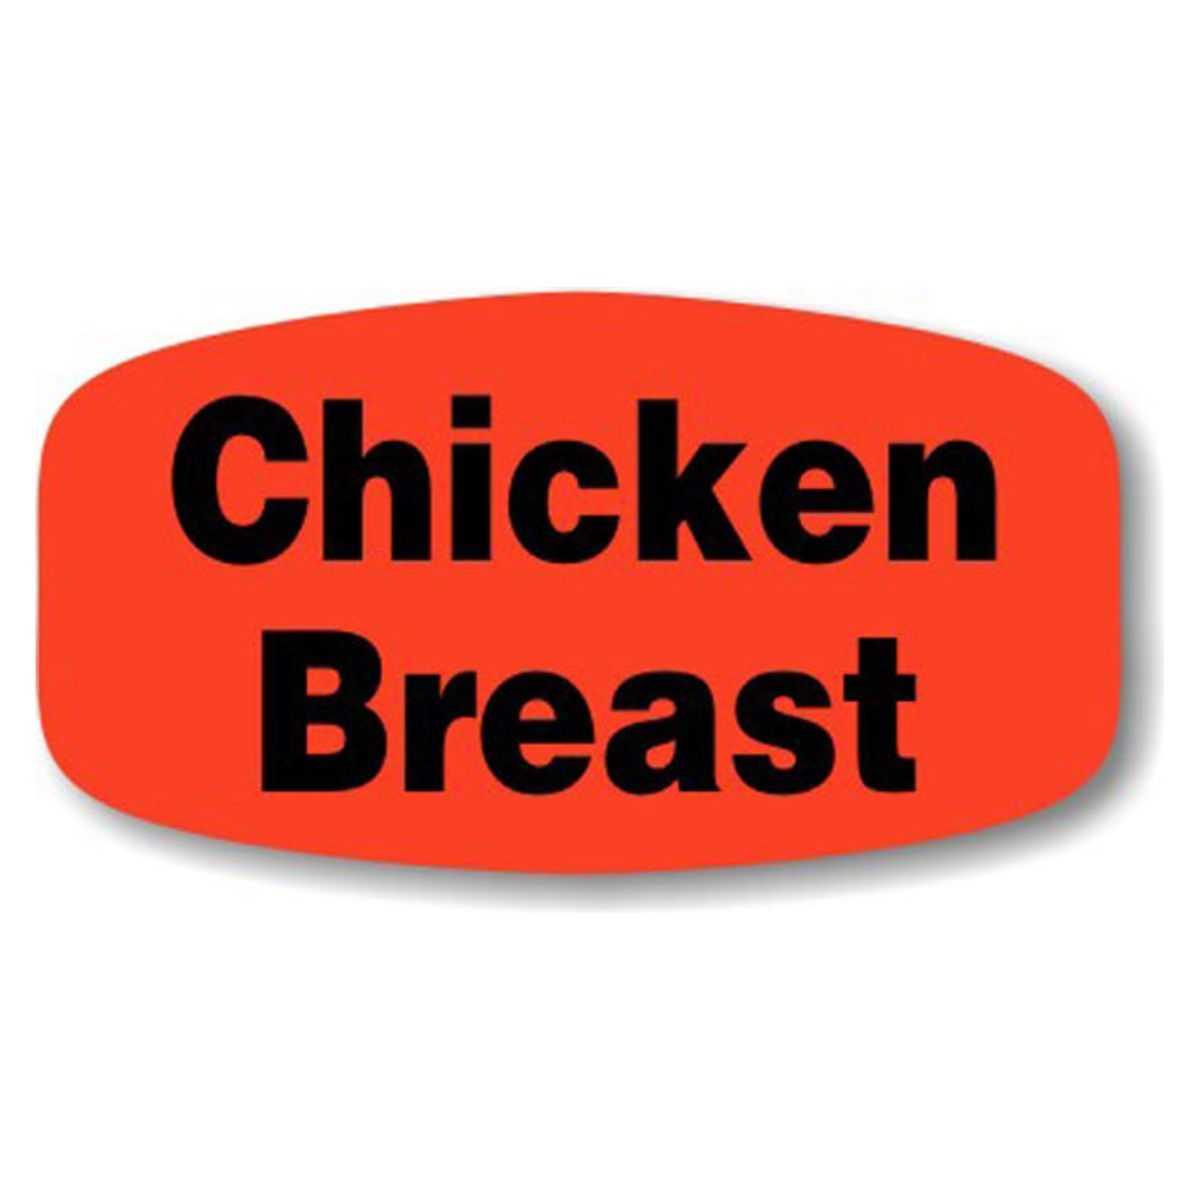 Bollin Label 12065 - Chicken Breast Black On Red Short Oval - Roll of 1000